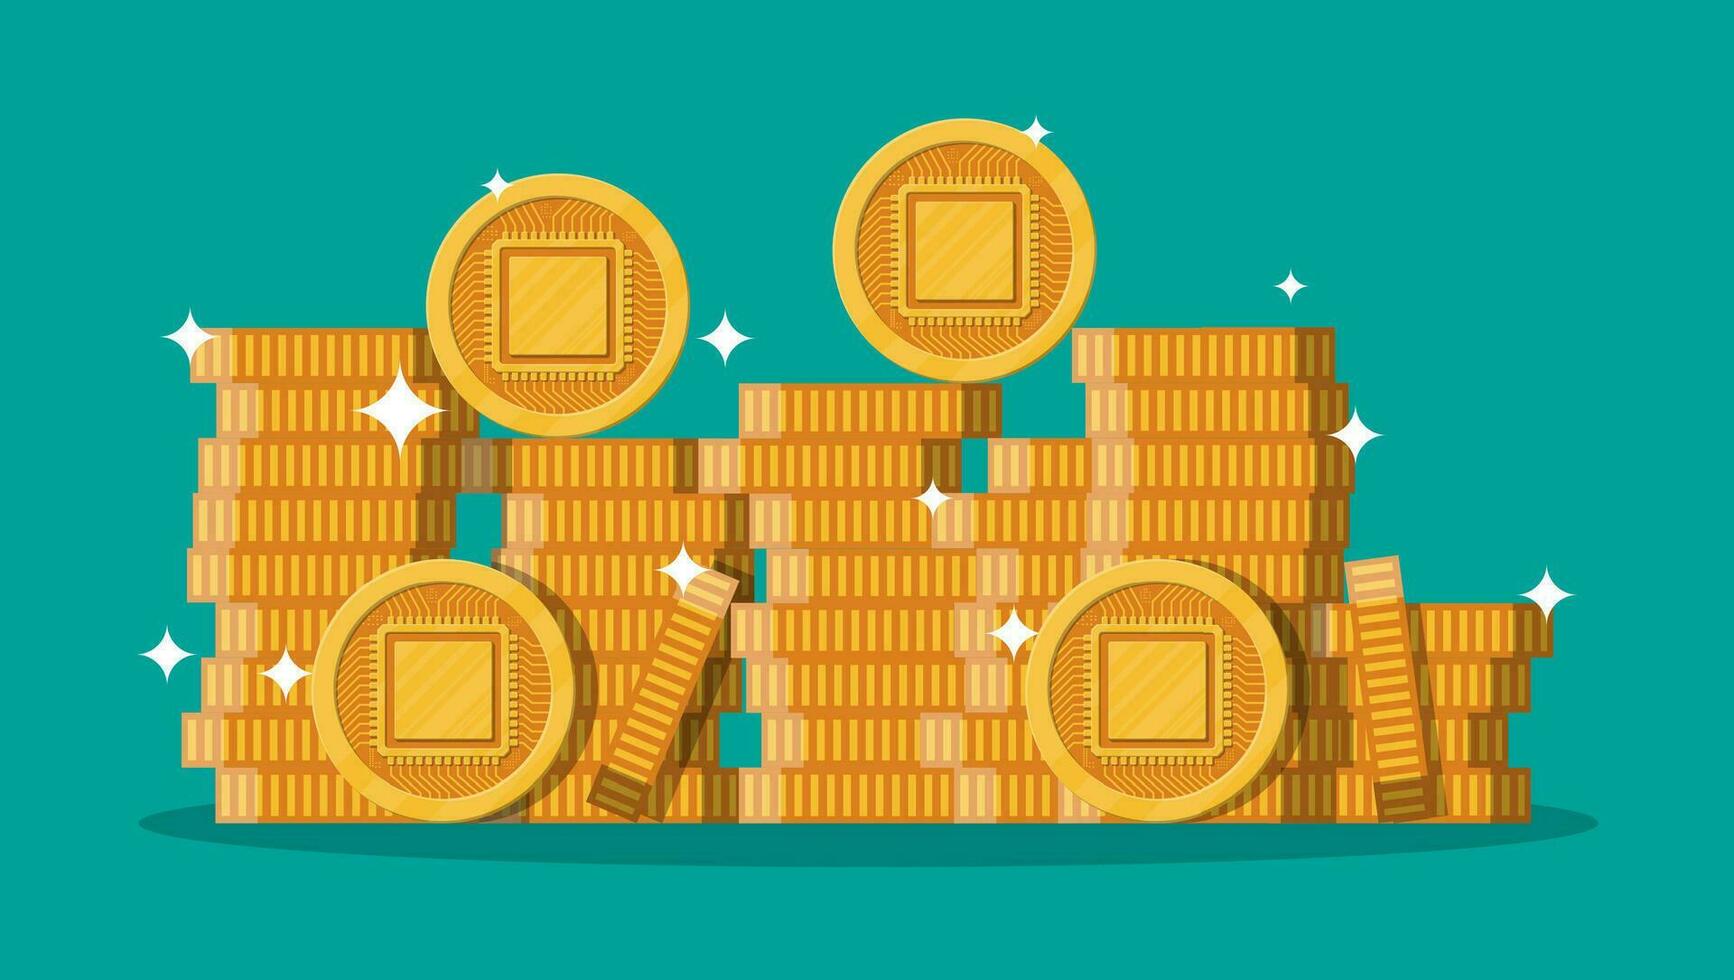 Stack of golden coin with computer chip. Money and finance. Digital currency. Virtual money, cryptocurrency and digital payment system. Vector illustration in flat style